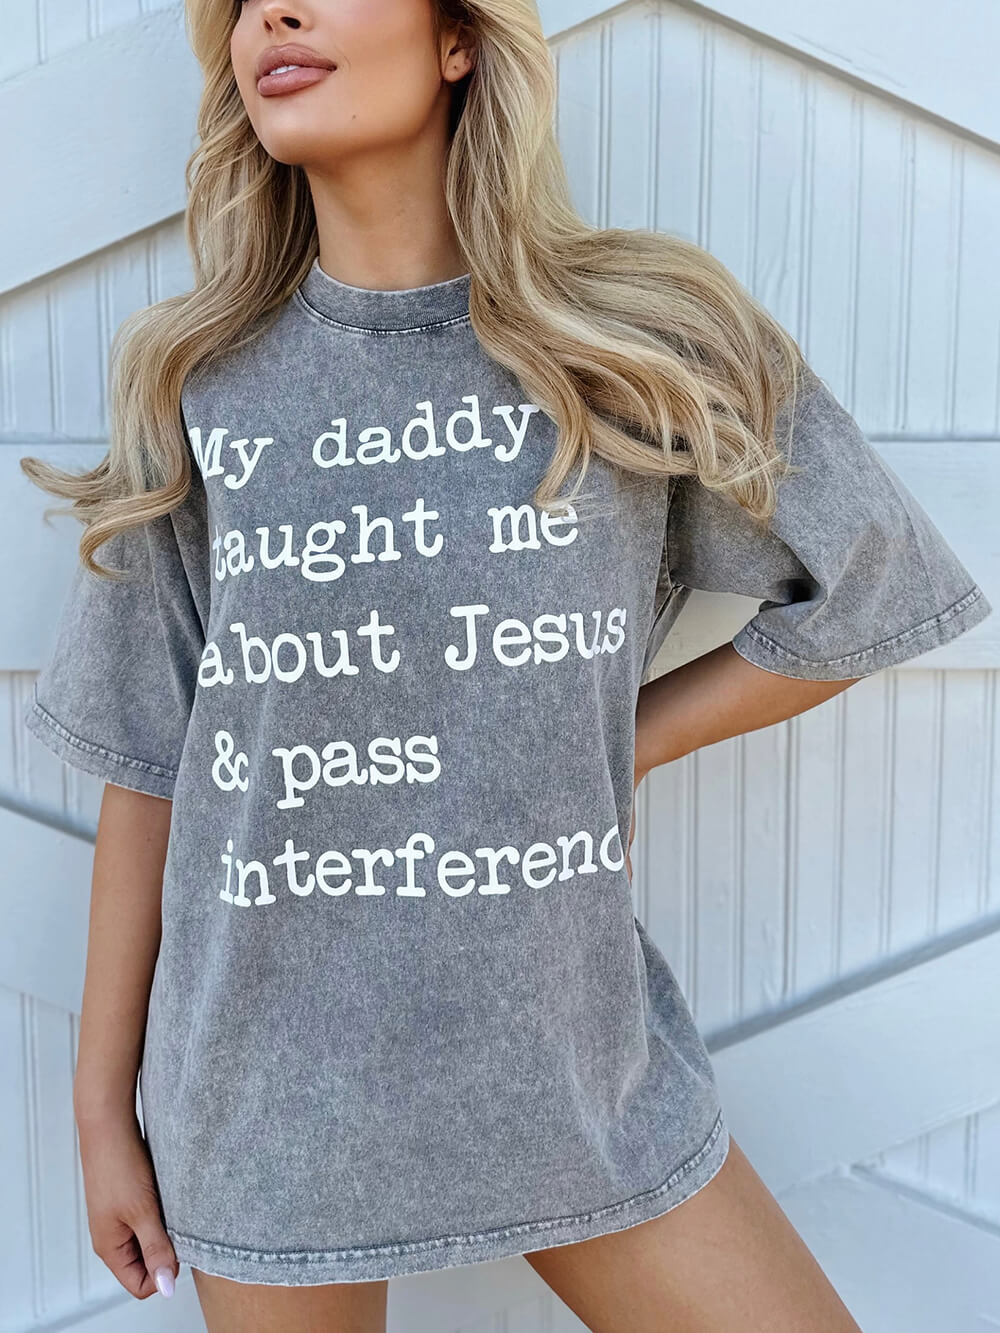 Mineral-Wash My Daddy Taught Me About Jesus & Pass Interference グレー T シャツ